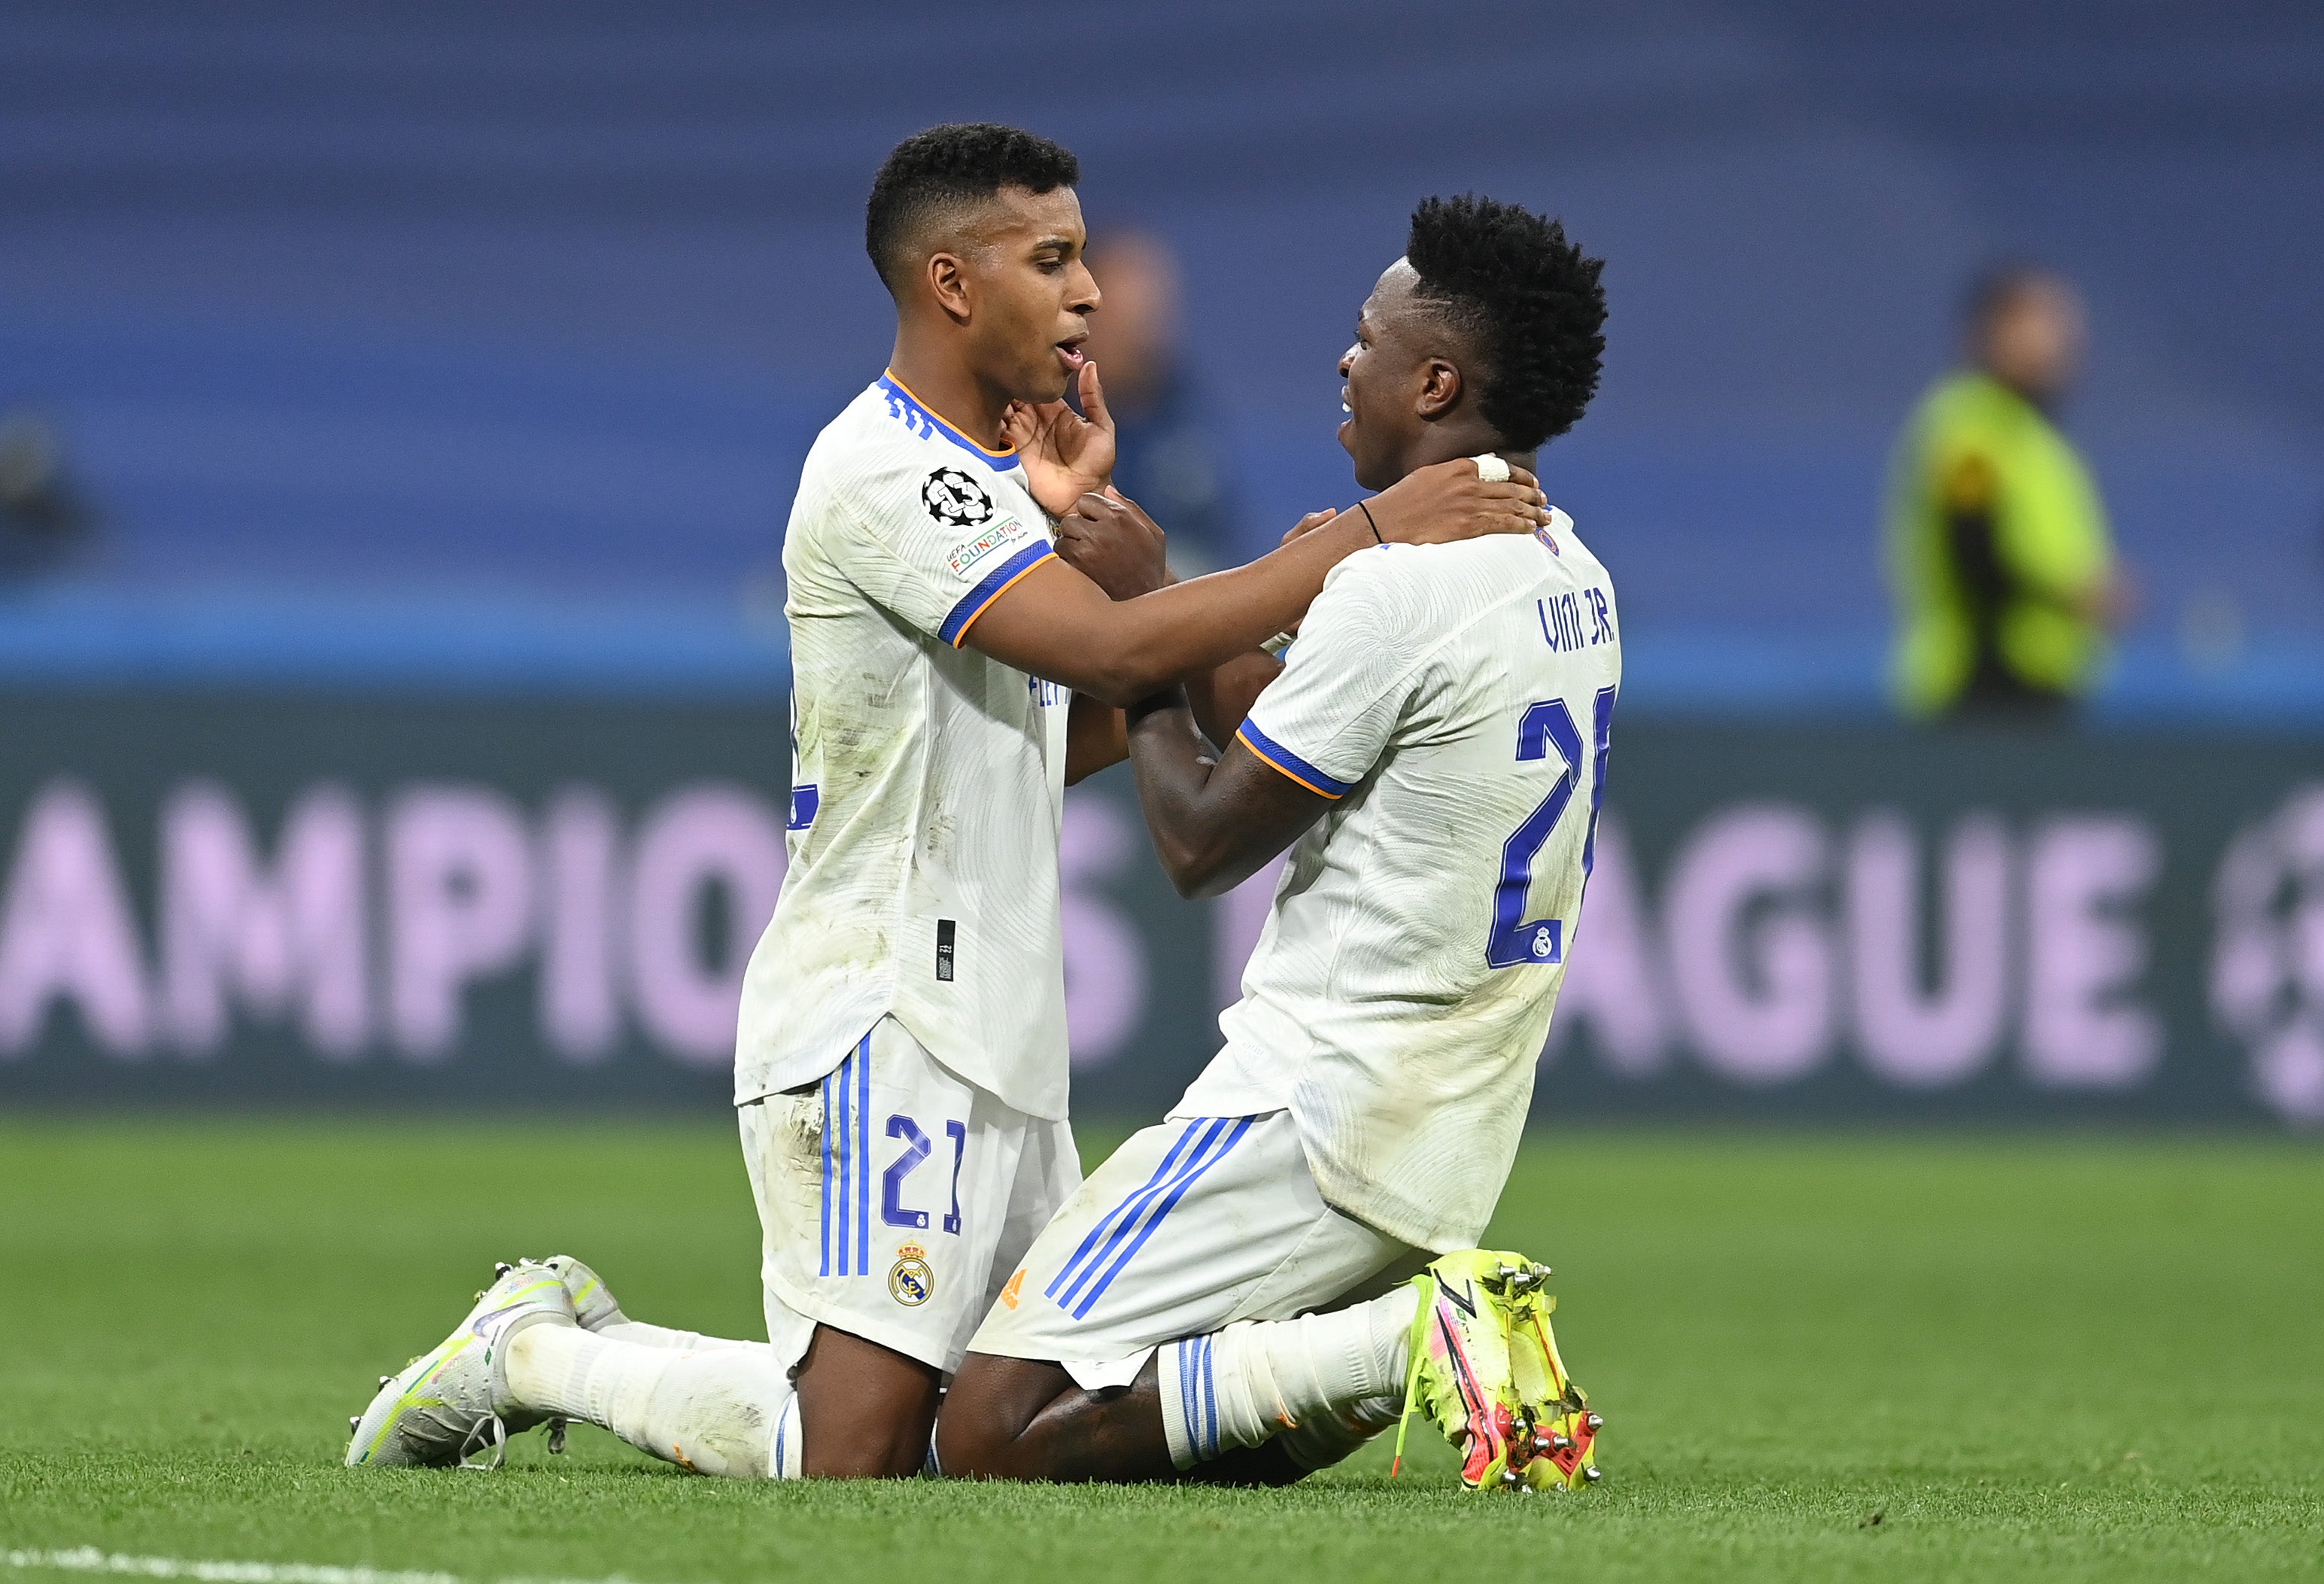 Rodrygo and Vinicius Junior have both played key roles in Real Madrid’s run to the Champions League final